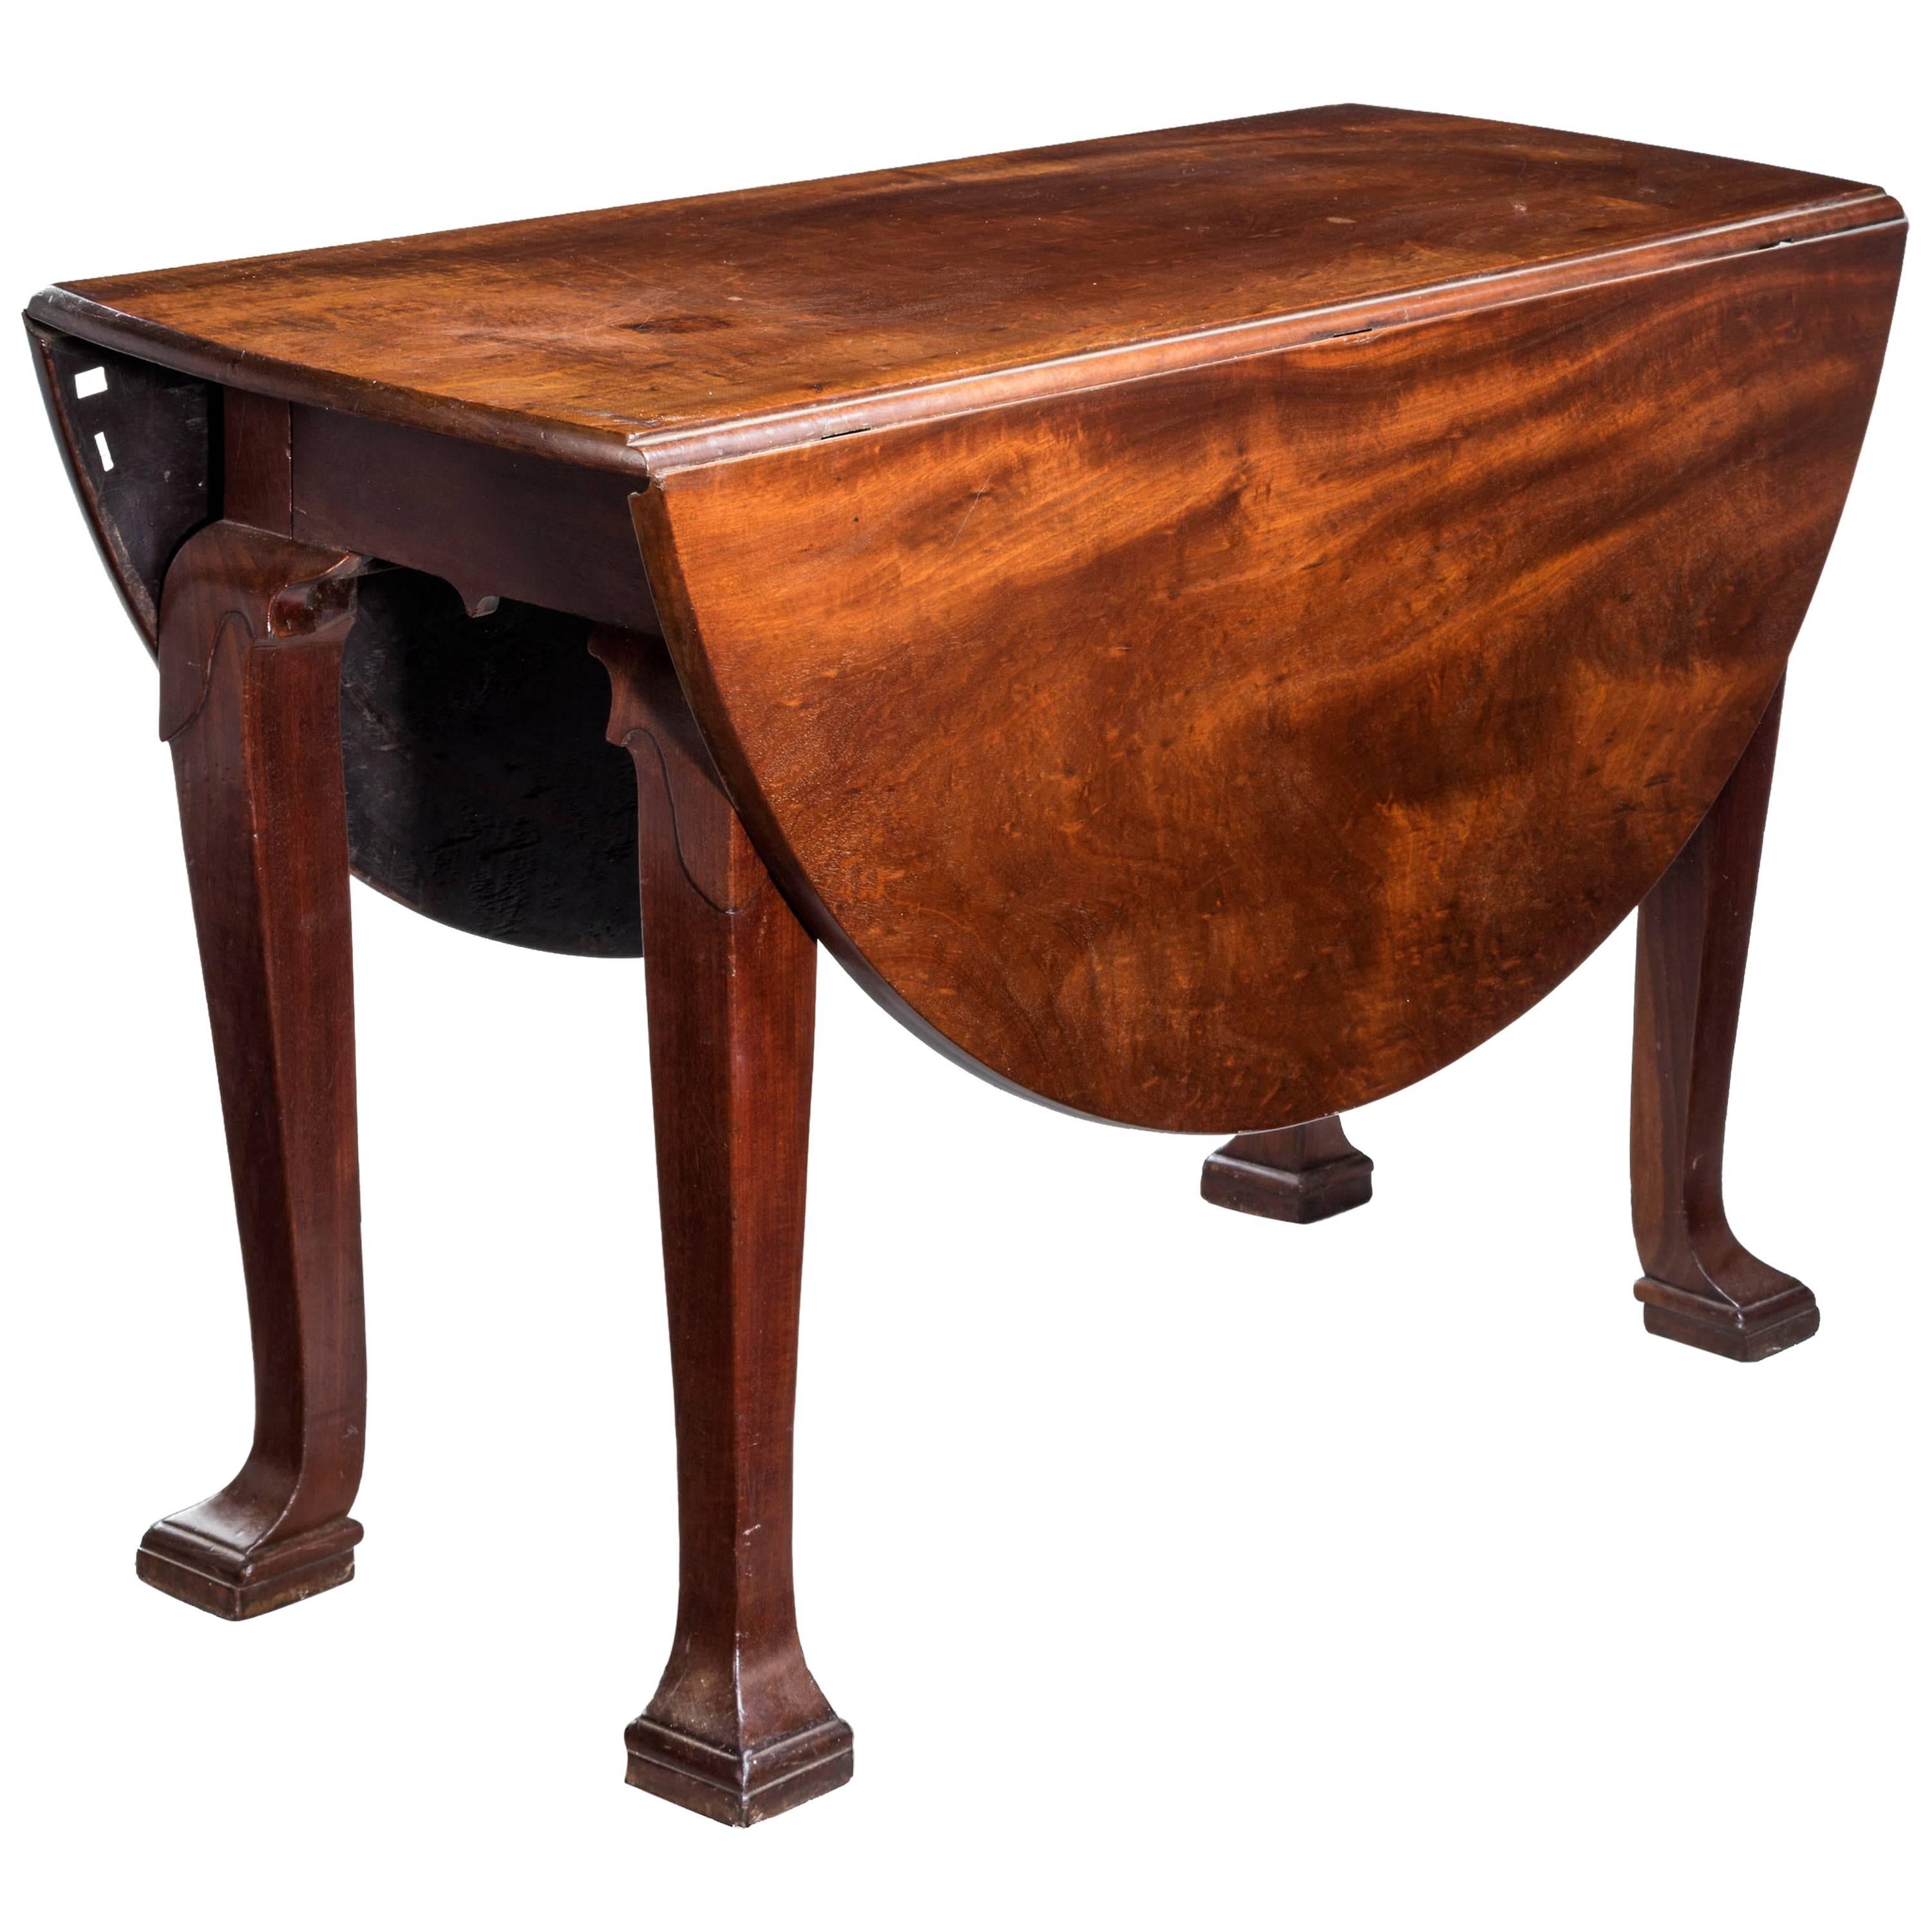 Late 18th Century Oval Drop-Leaf Table